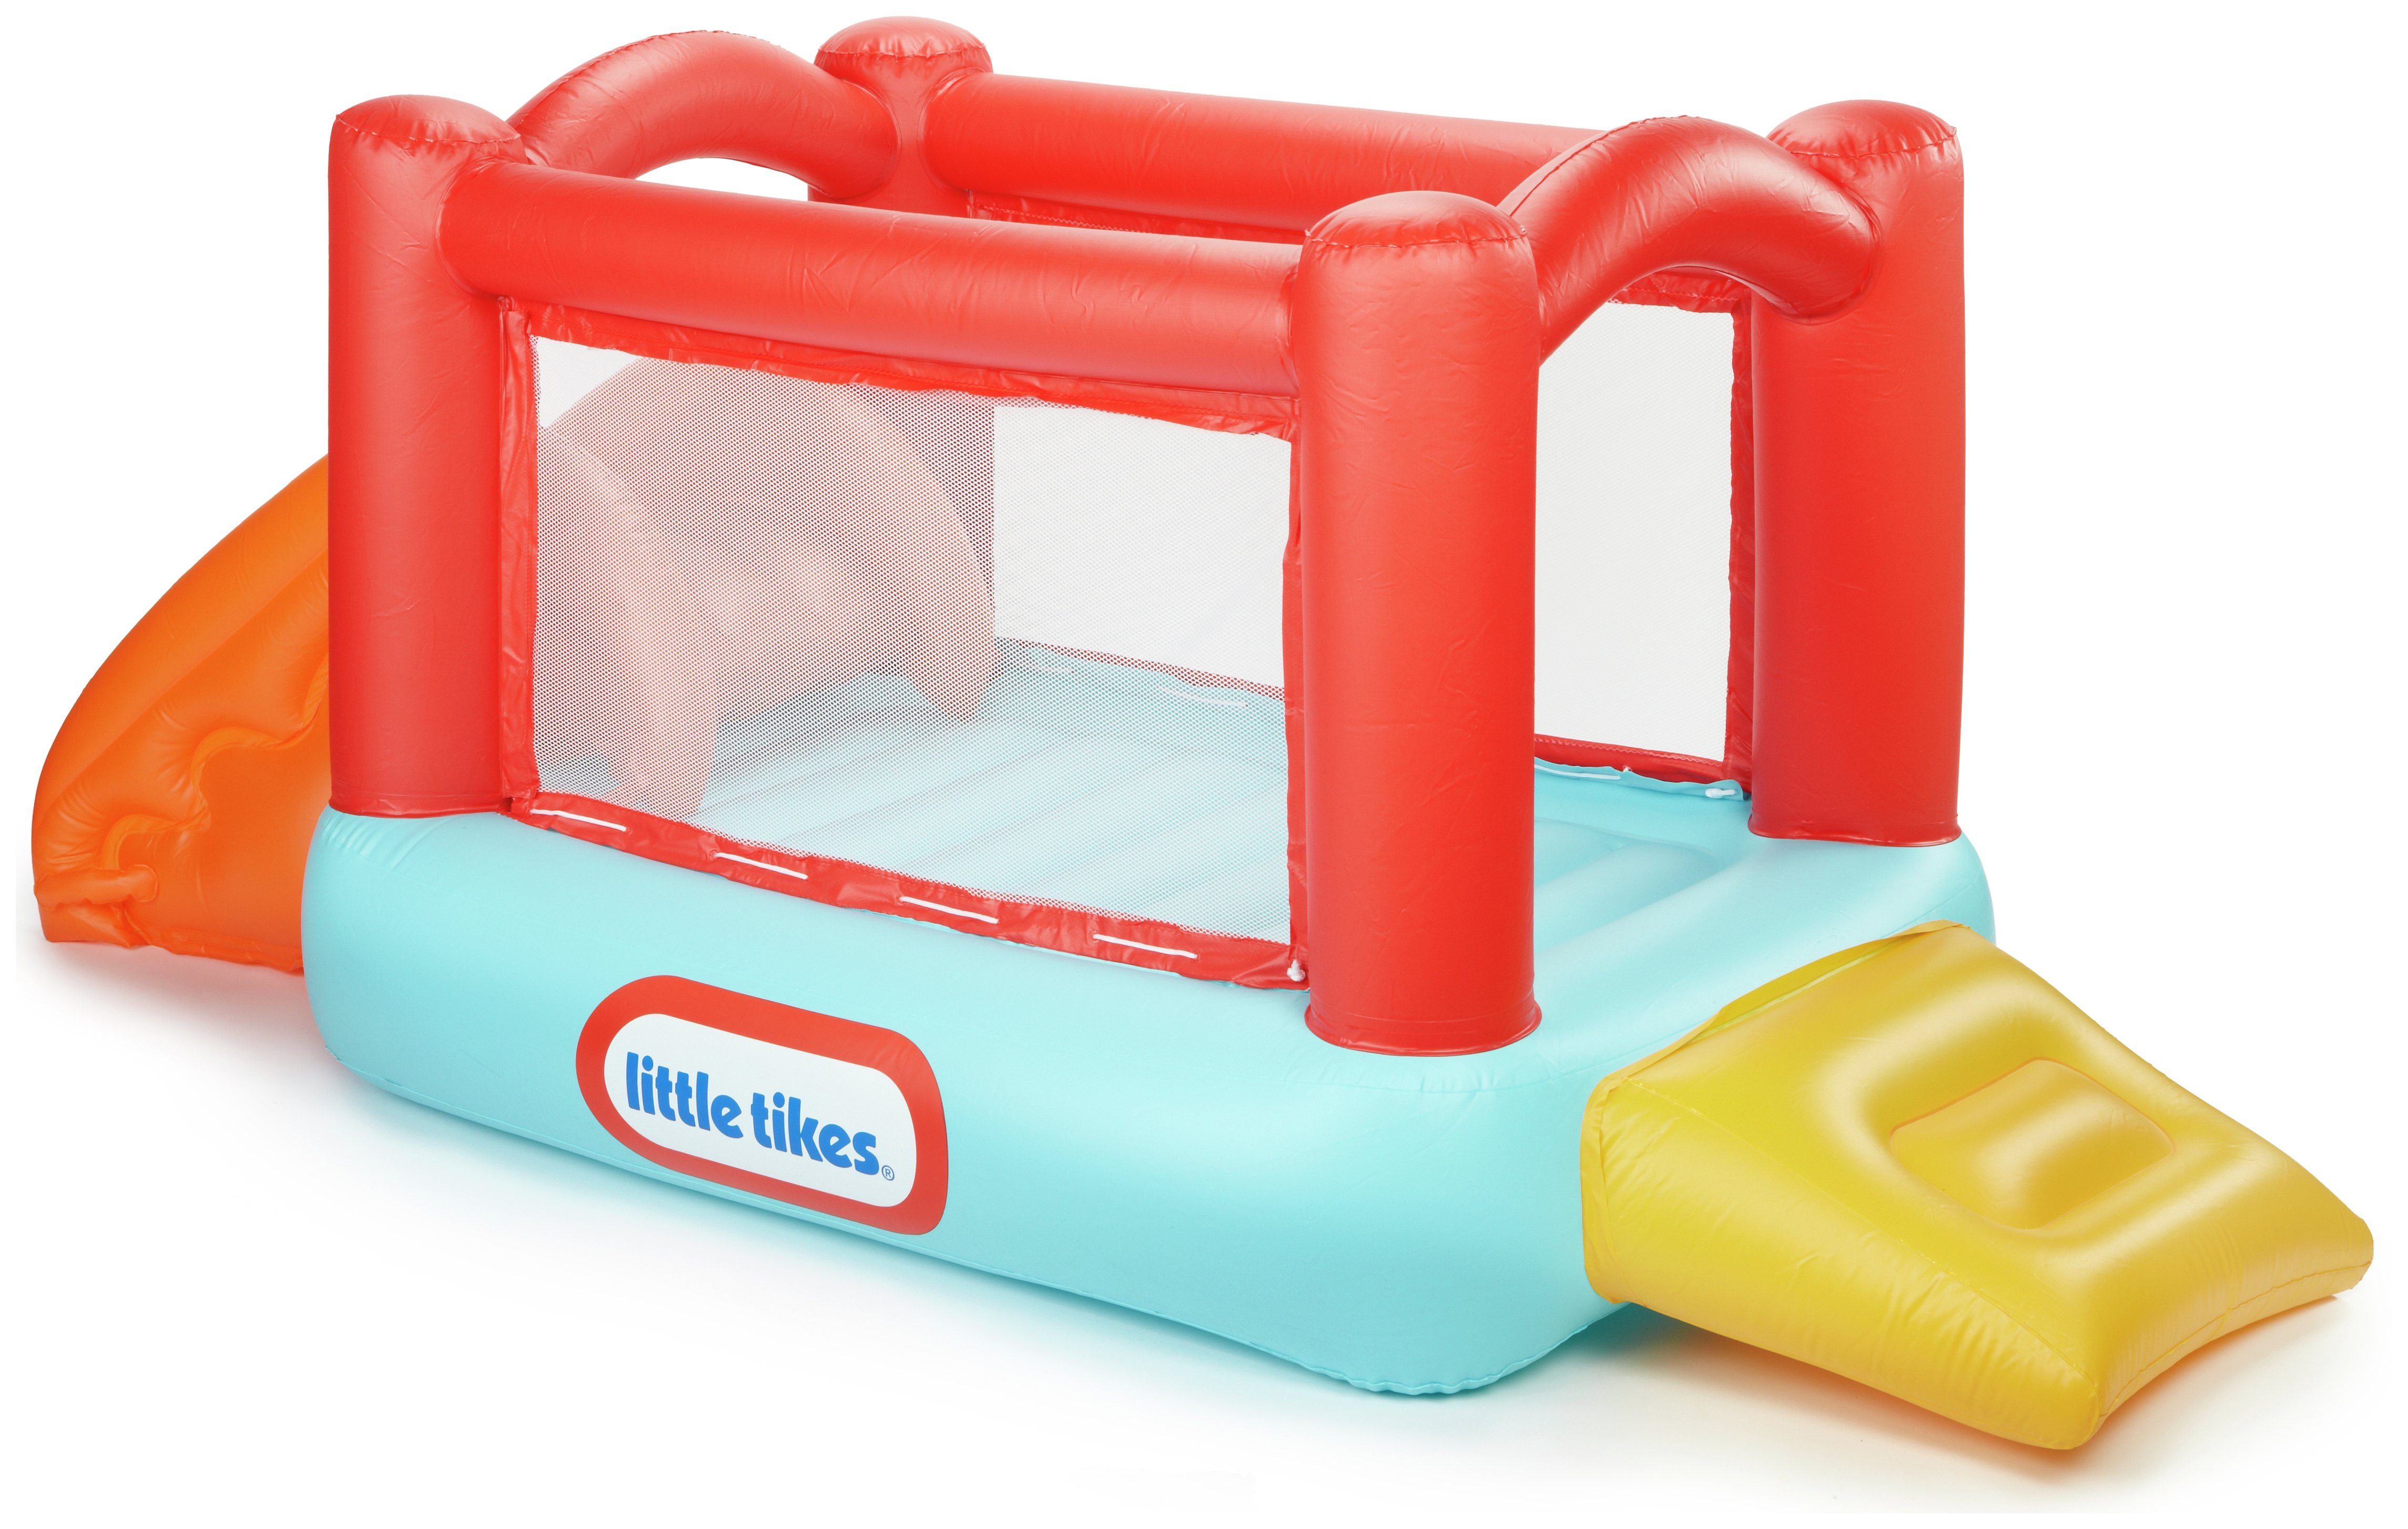 Review of Little Tikes My First Bouncer.